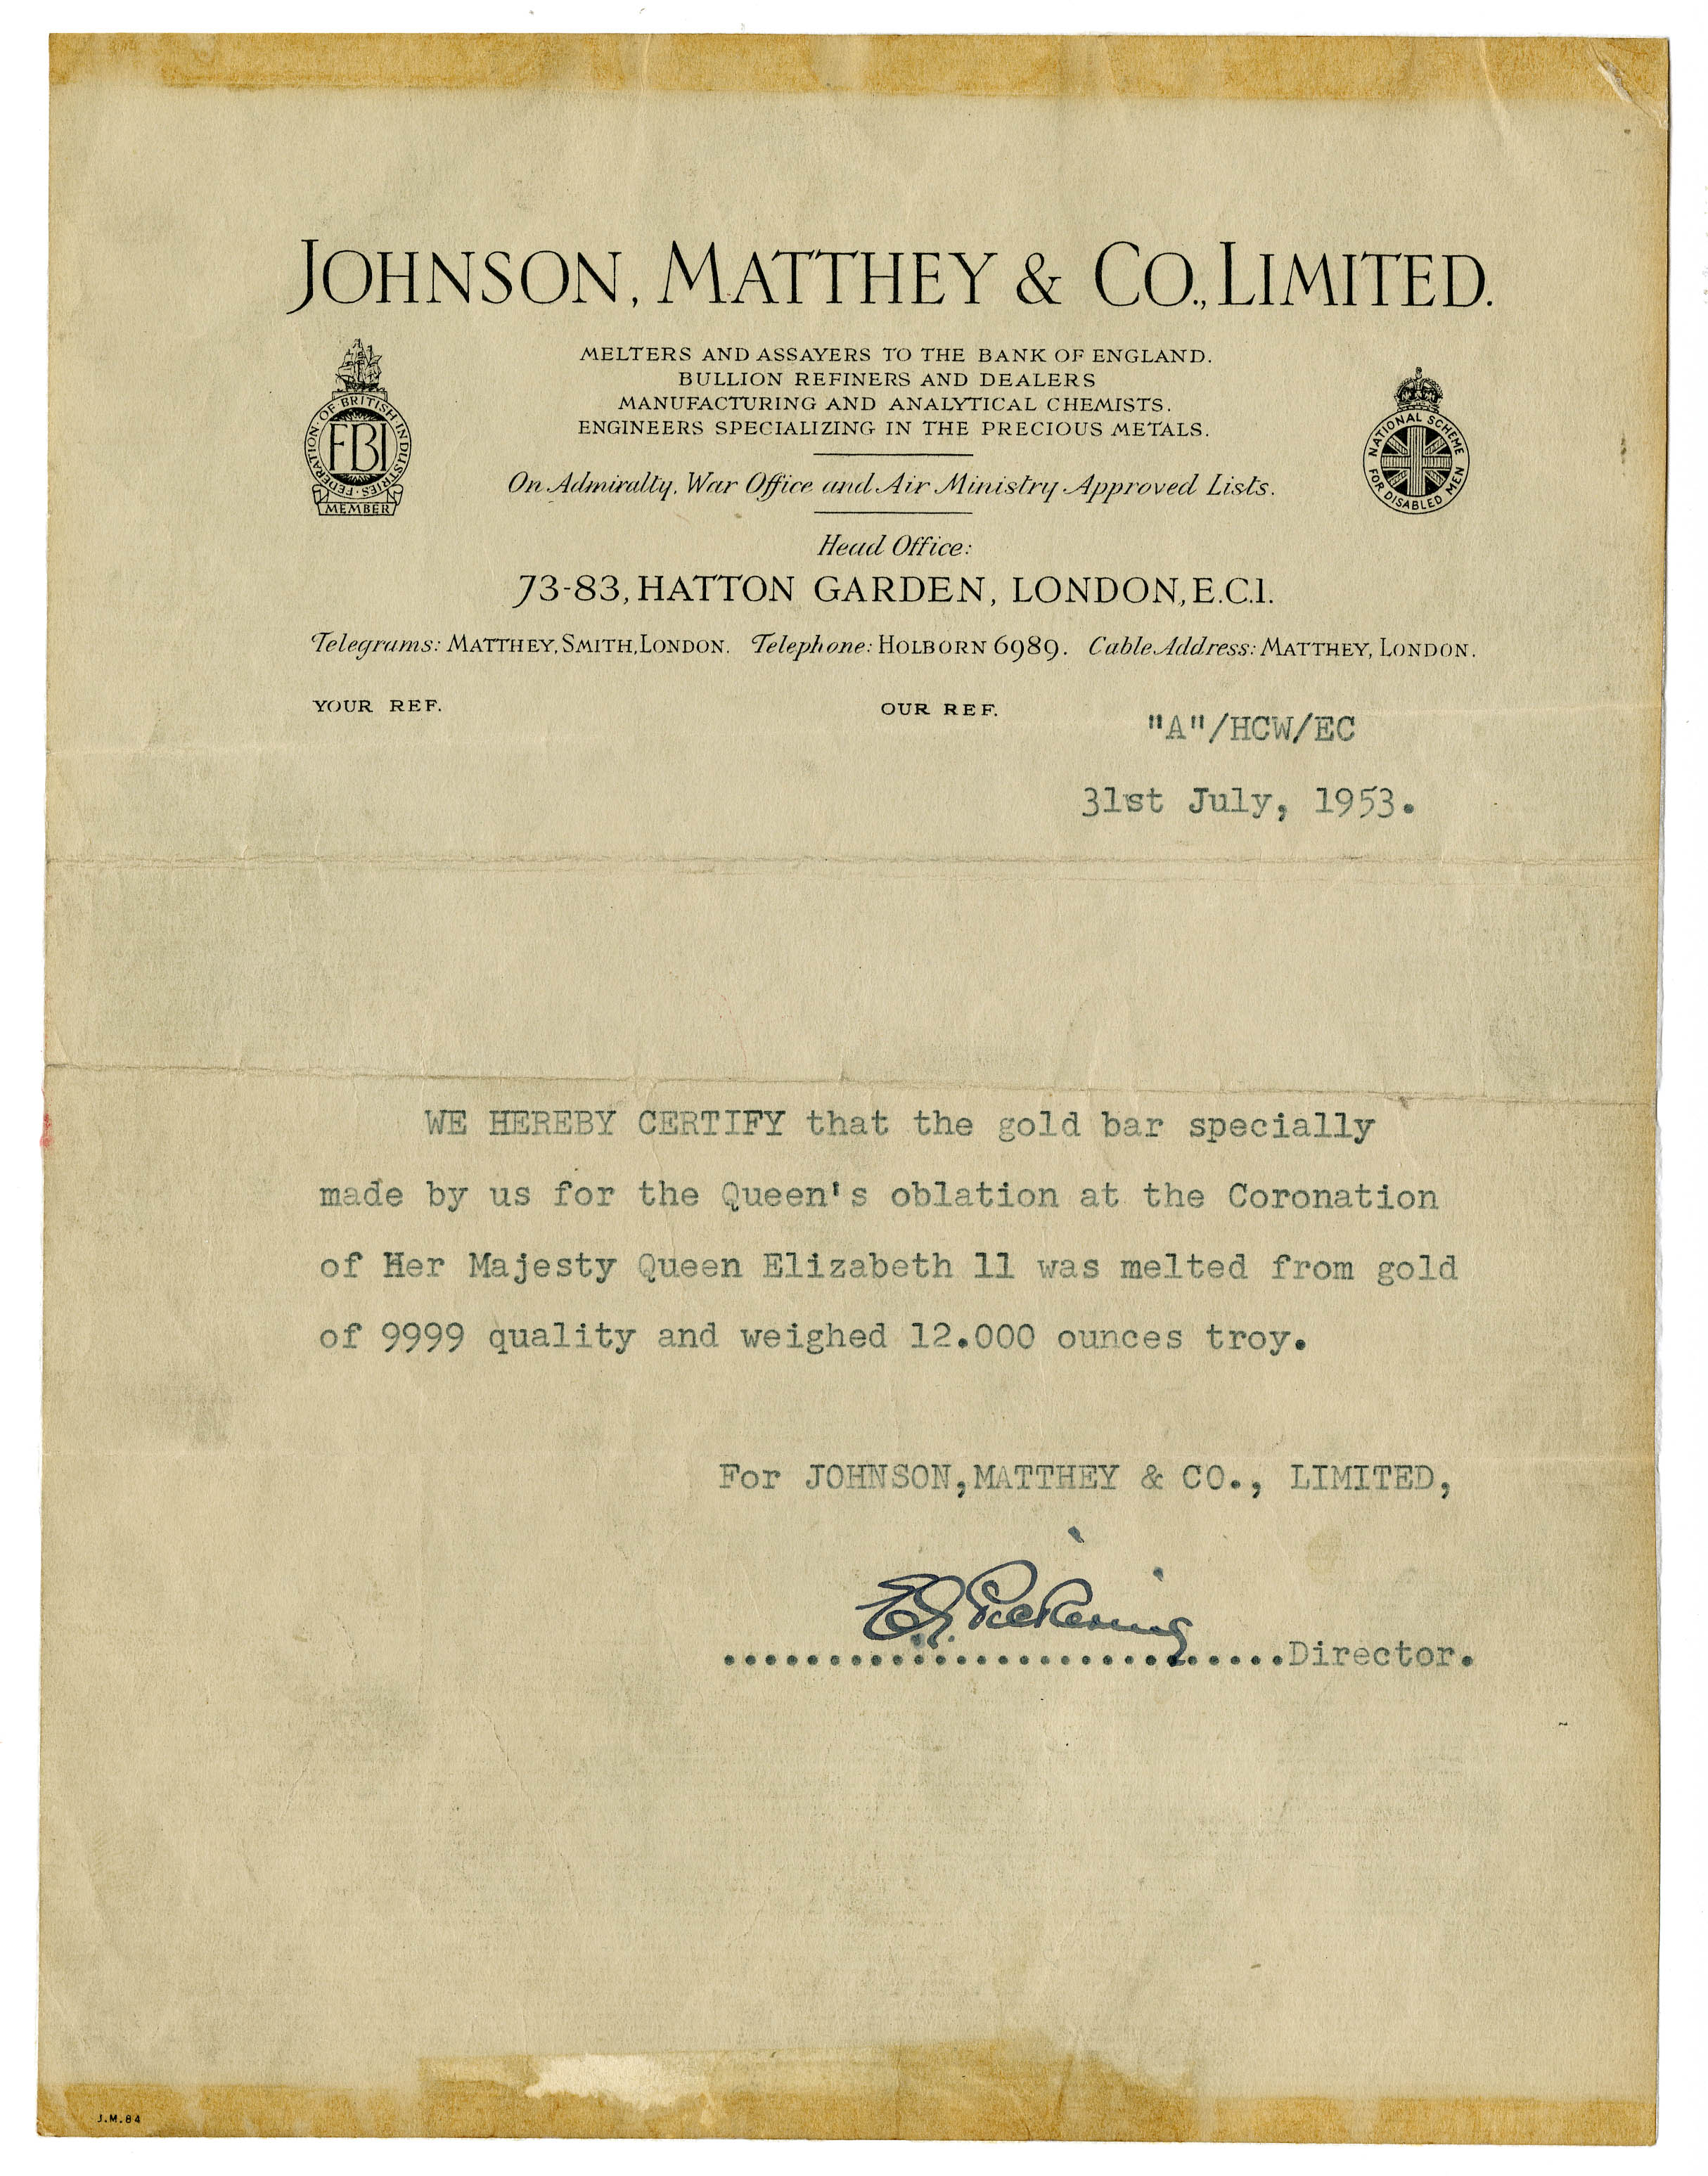 A certificate from the refiners Johnson, Matthey & Co testifying the purity of the coronation gold bar. It reads: We Hereby certify that the gold bar specially made by us for the Queen’s oblation at the Coronation of Her Majesty Queen Elizabeth II was melted from gold of 9999 quality and weighed 12.000 ounces troy. 